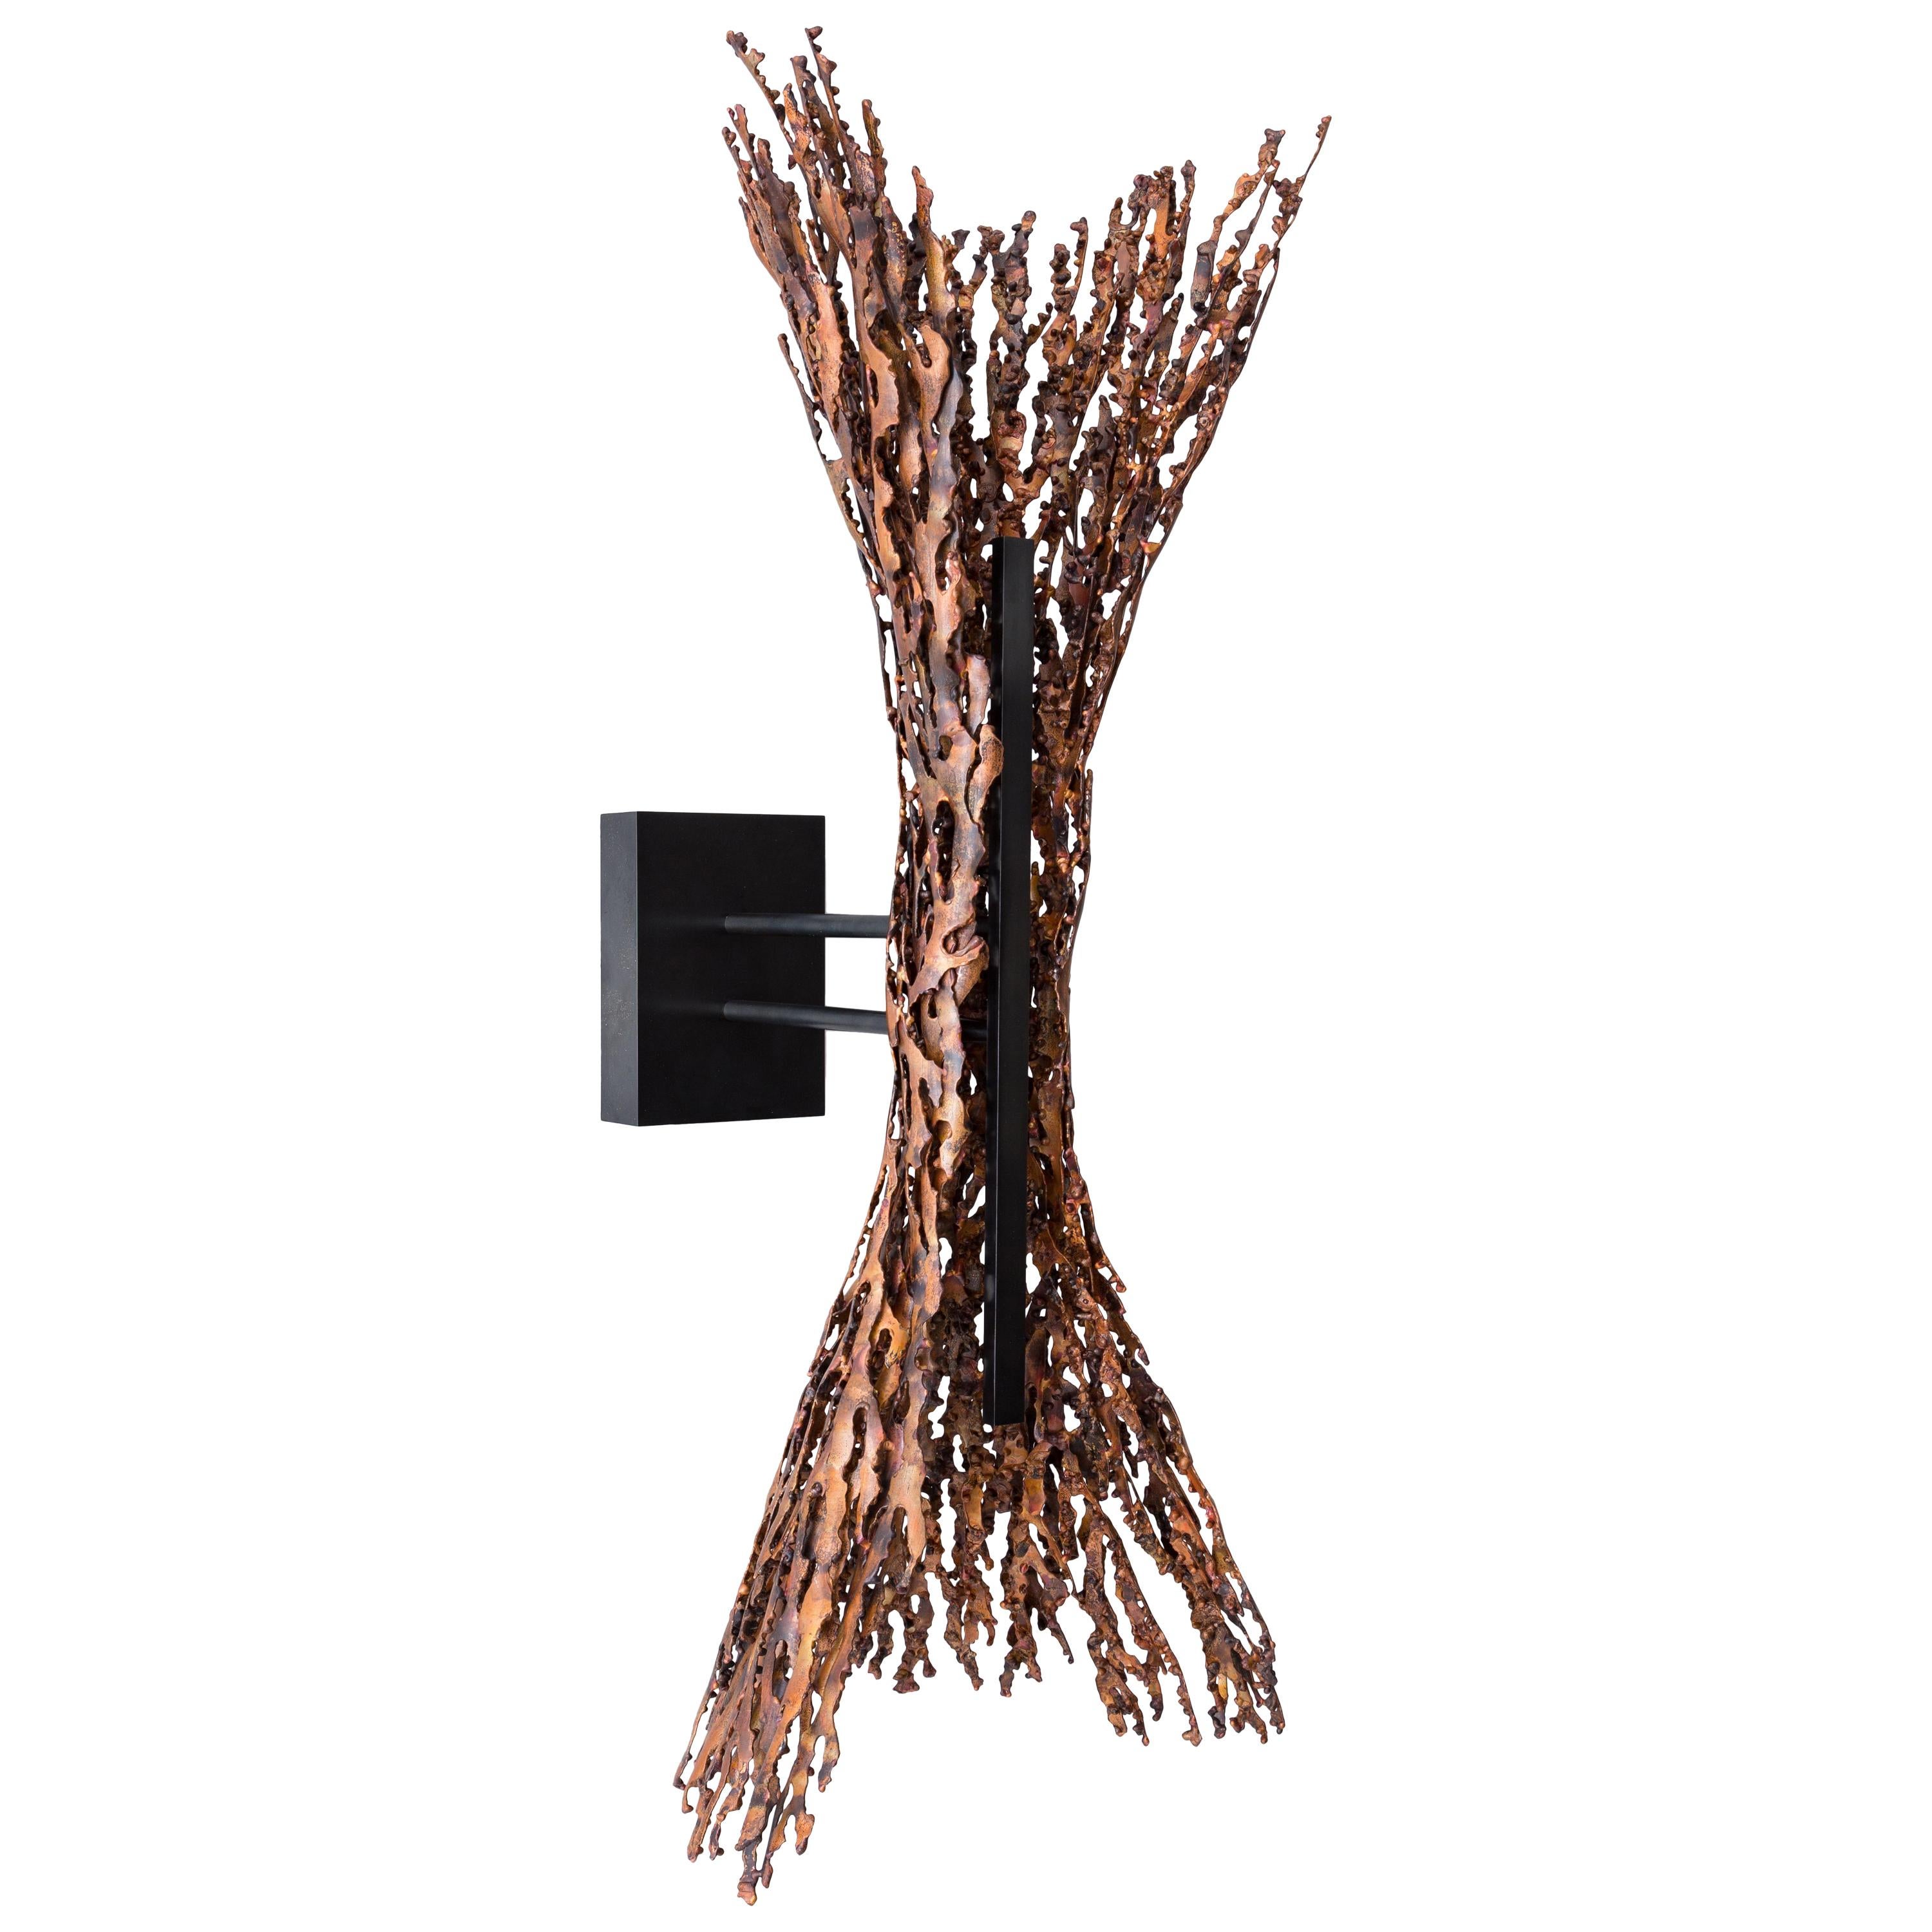 Burnt Copper Form Sconce, Spreading, Wall Sculpture For Sale